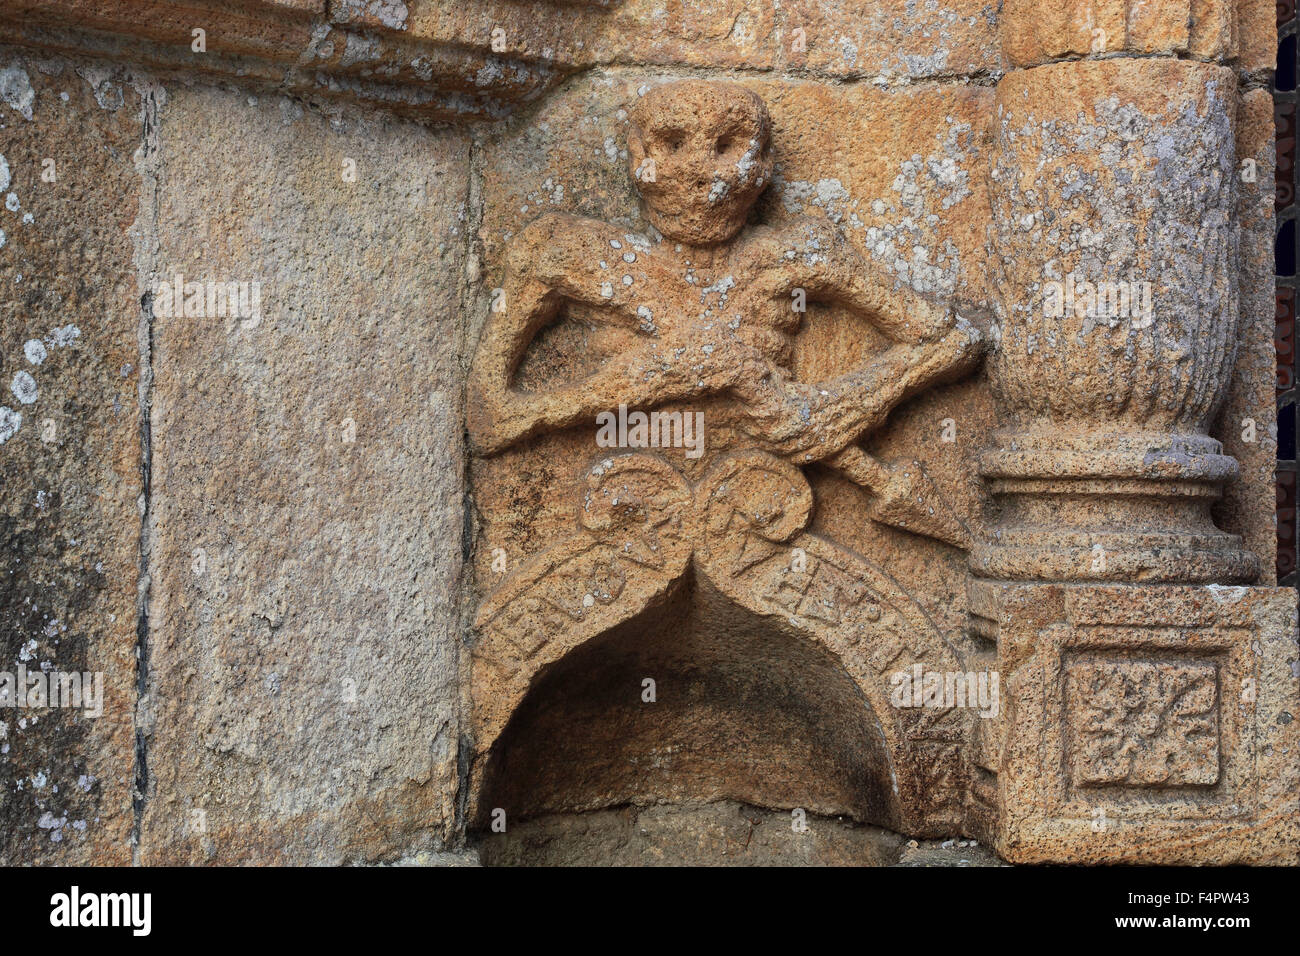 France, Brittany, walled parish of the church La Roche Maurice, Sculpture death on the ossuary, Ankou sur l'ossuaire Stock Photo